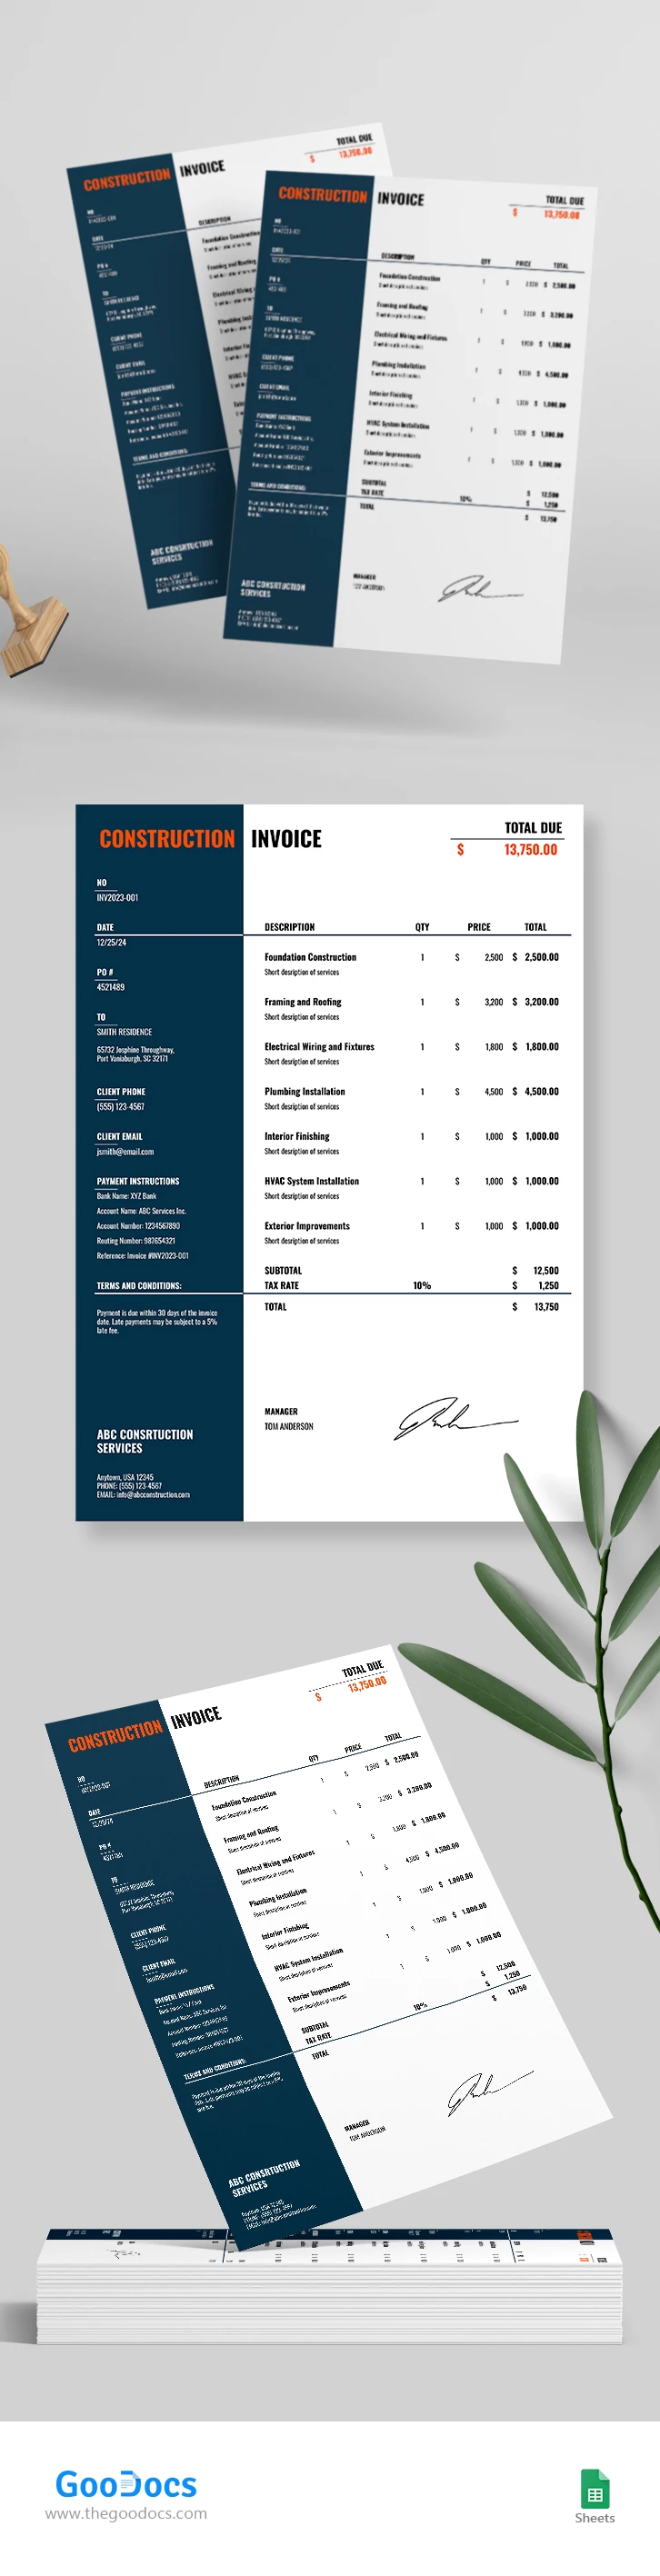 Strict Construction Invoice - free Google Docs Template - 10068082